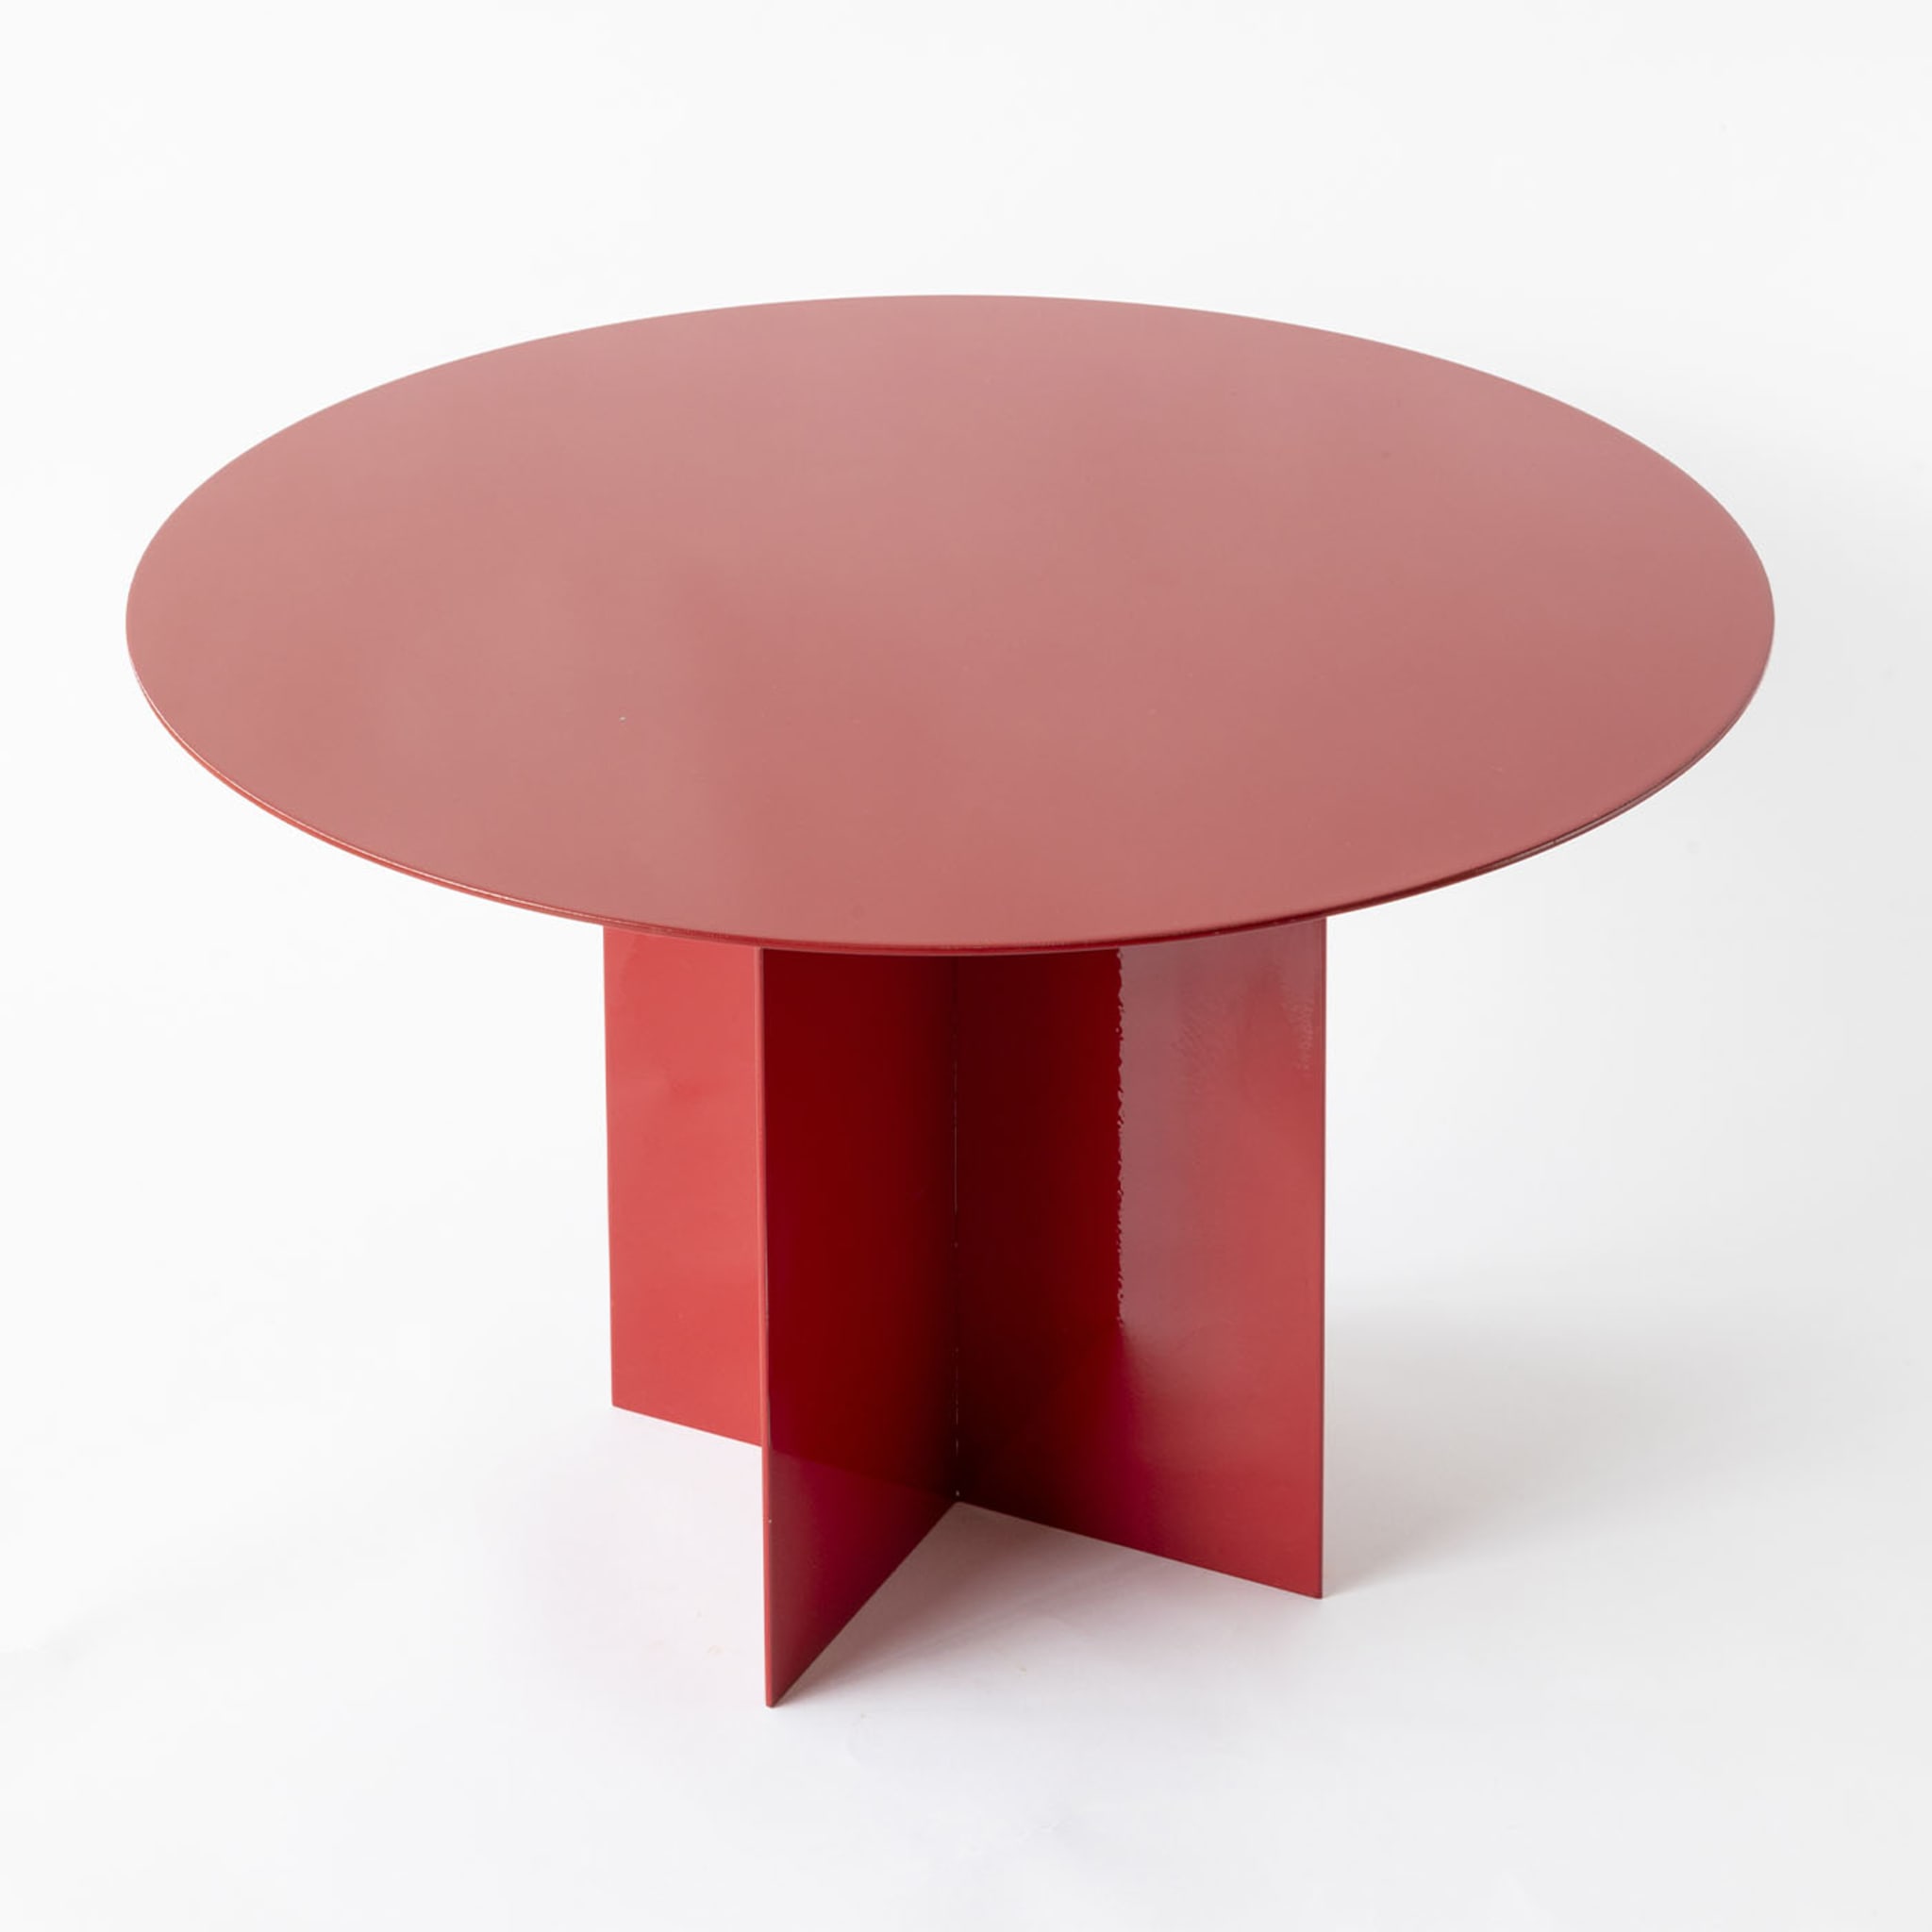 Across Large Red Side Table  - Alternative view 2